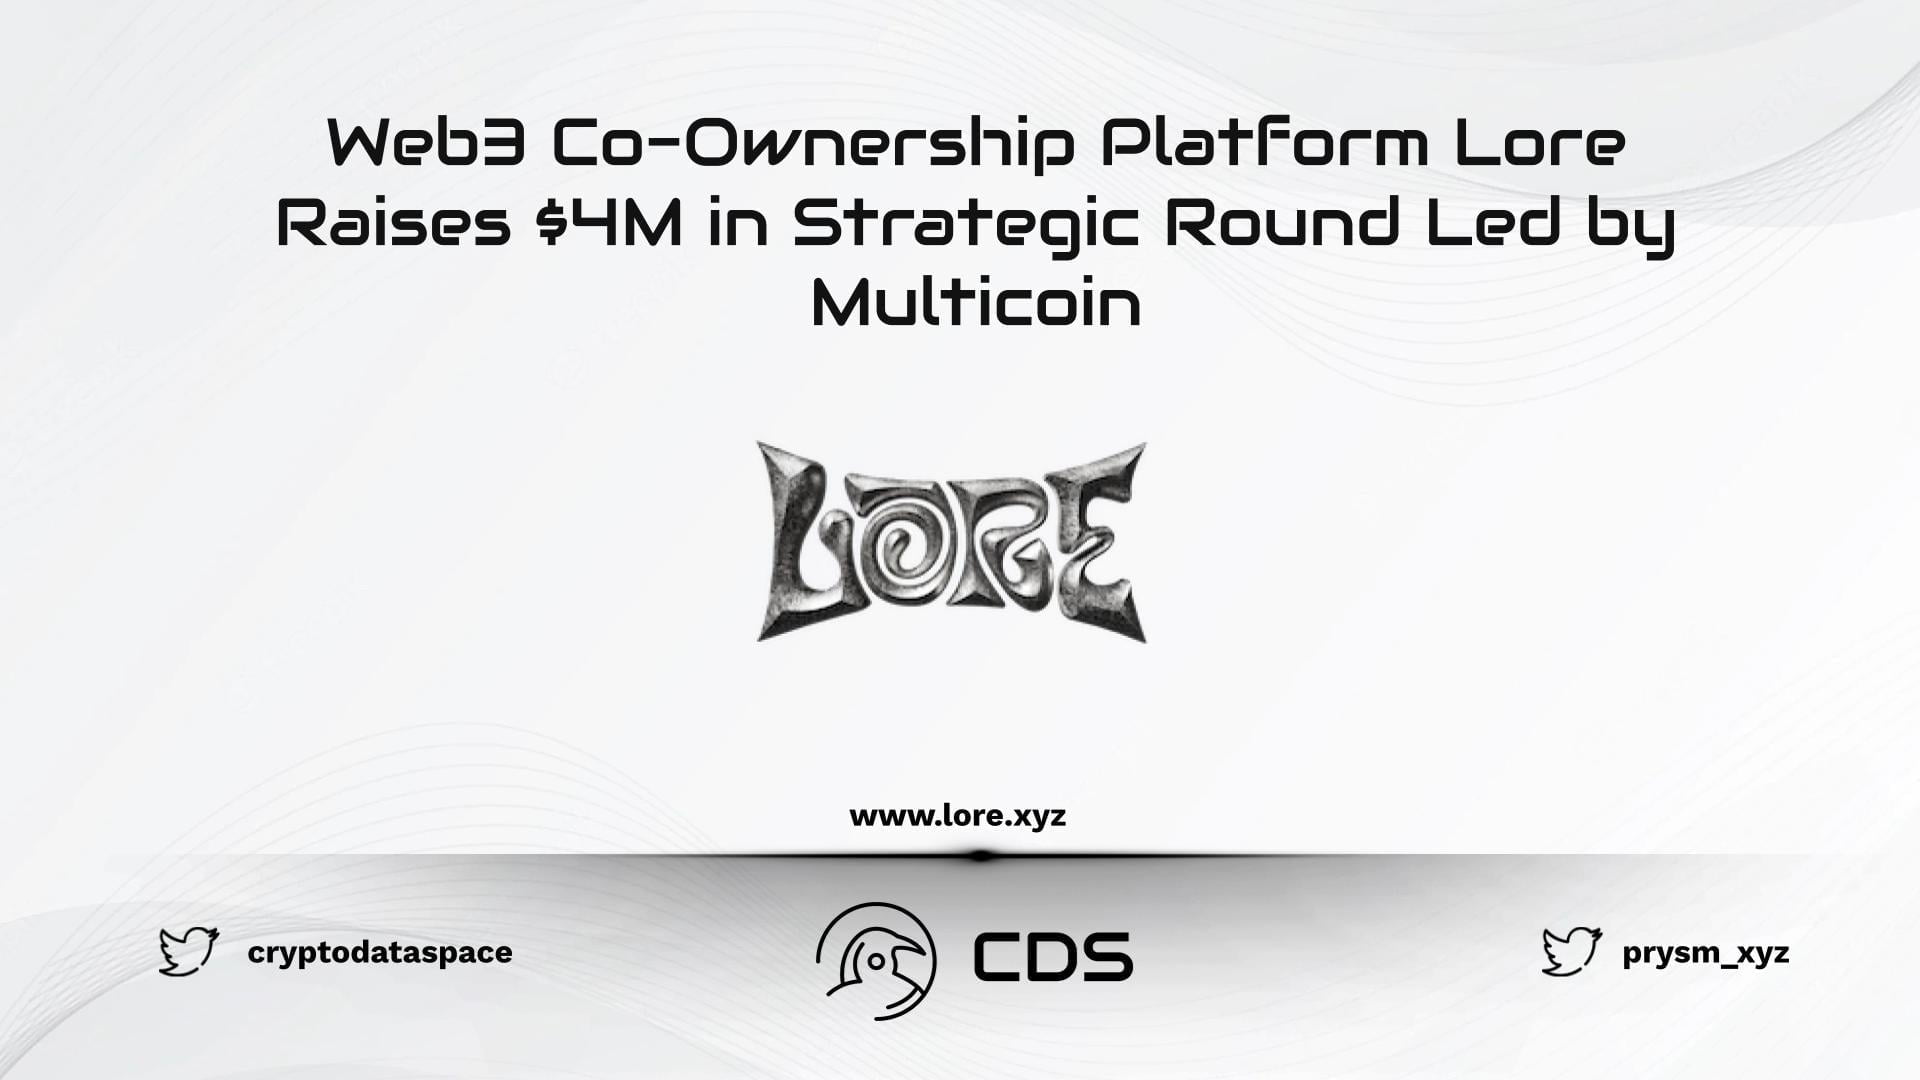 Web3 Co-Ownership Platform Lore Raises $4M in Strategic Round Led by Multicoin